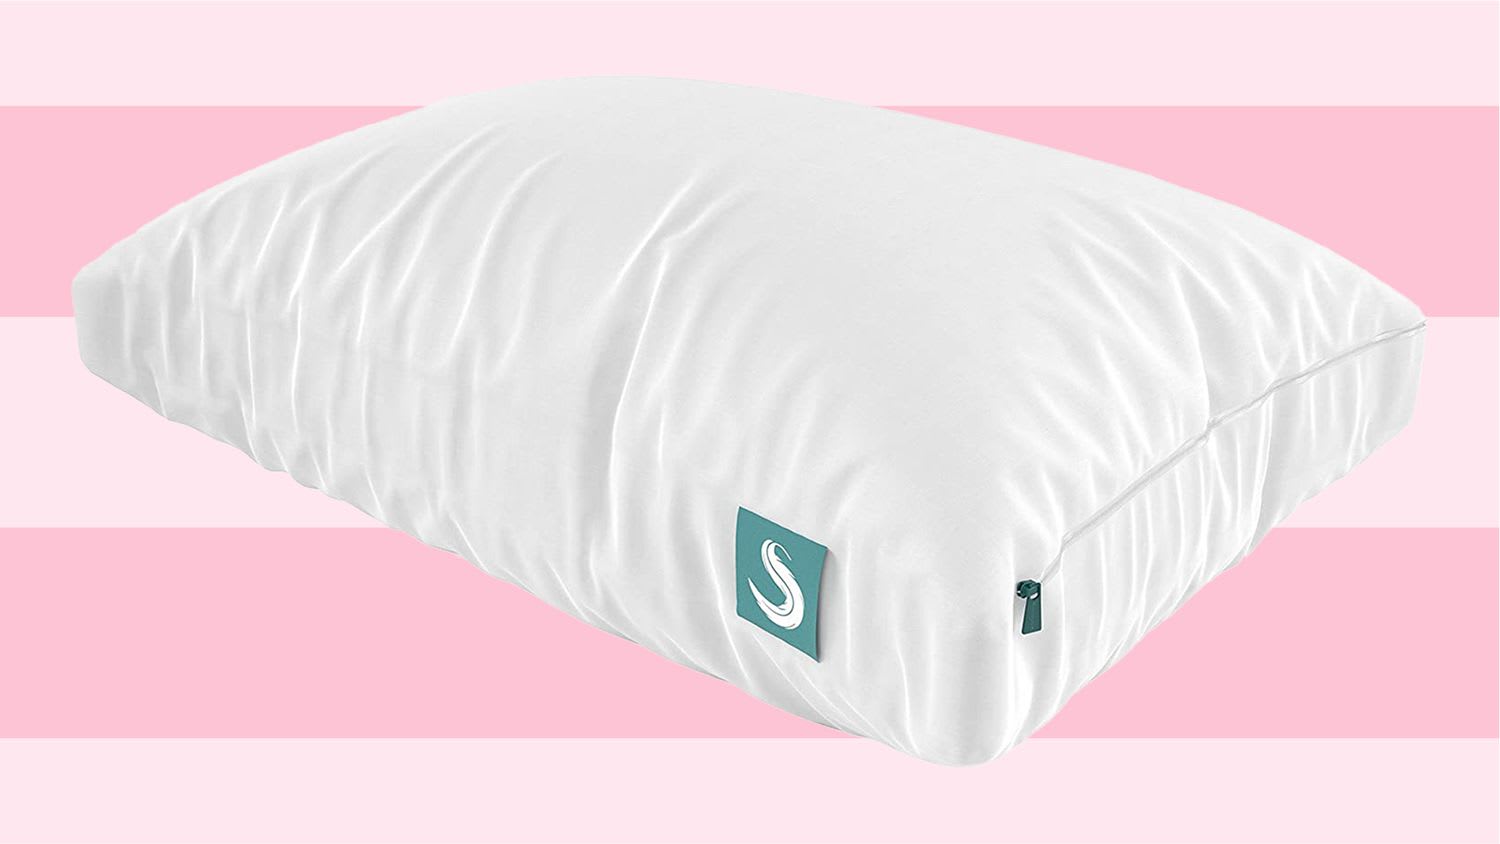 Shoppers Swear This 'Pancake' Pillow Is the Secret to Getting Rid of Neck Pain